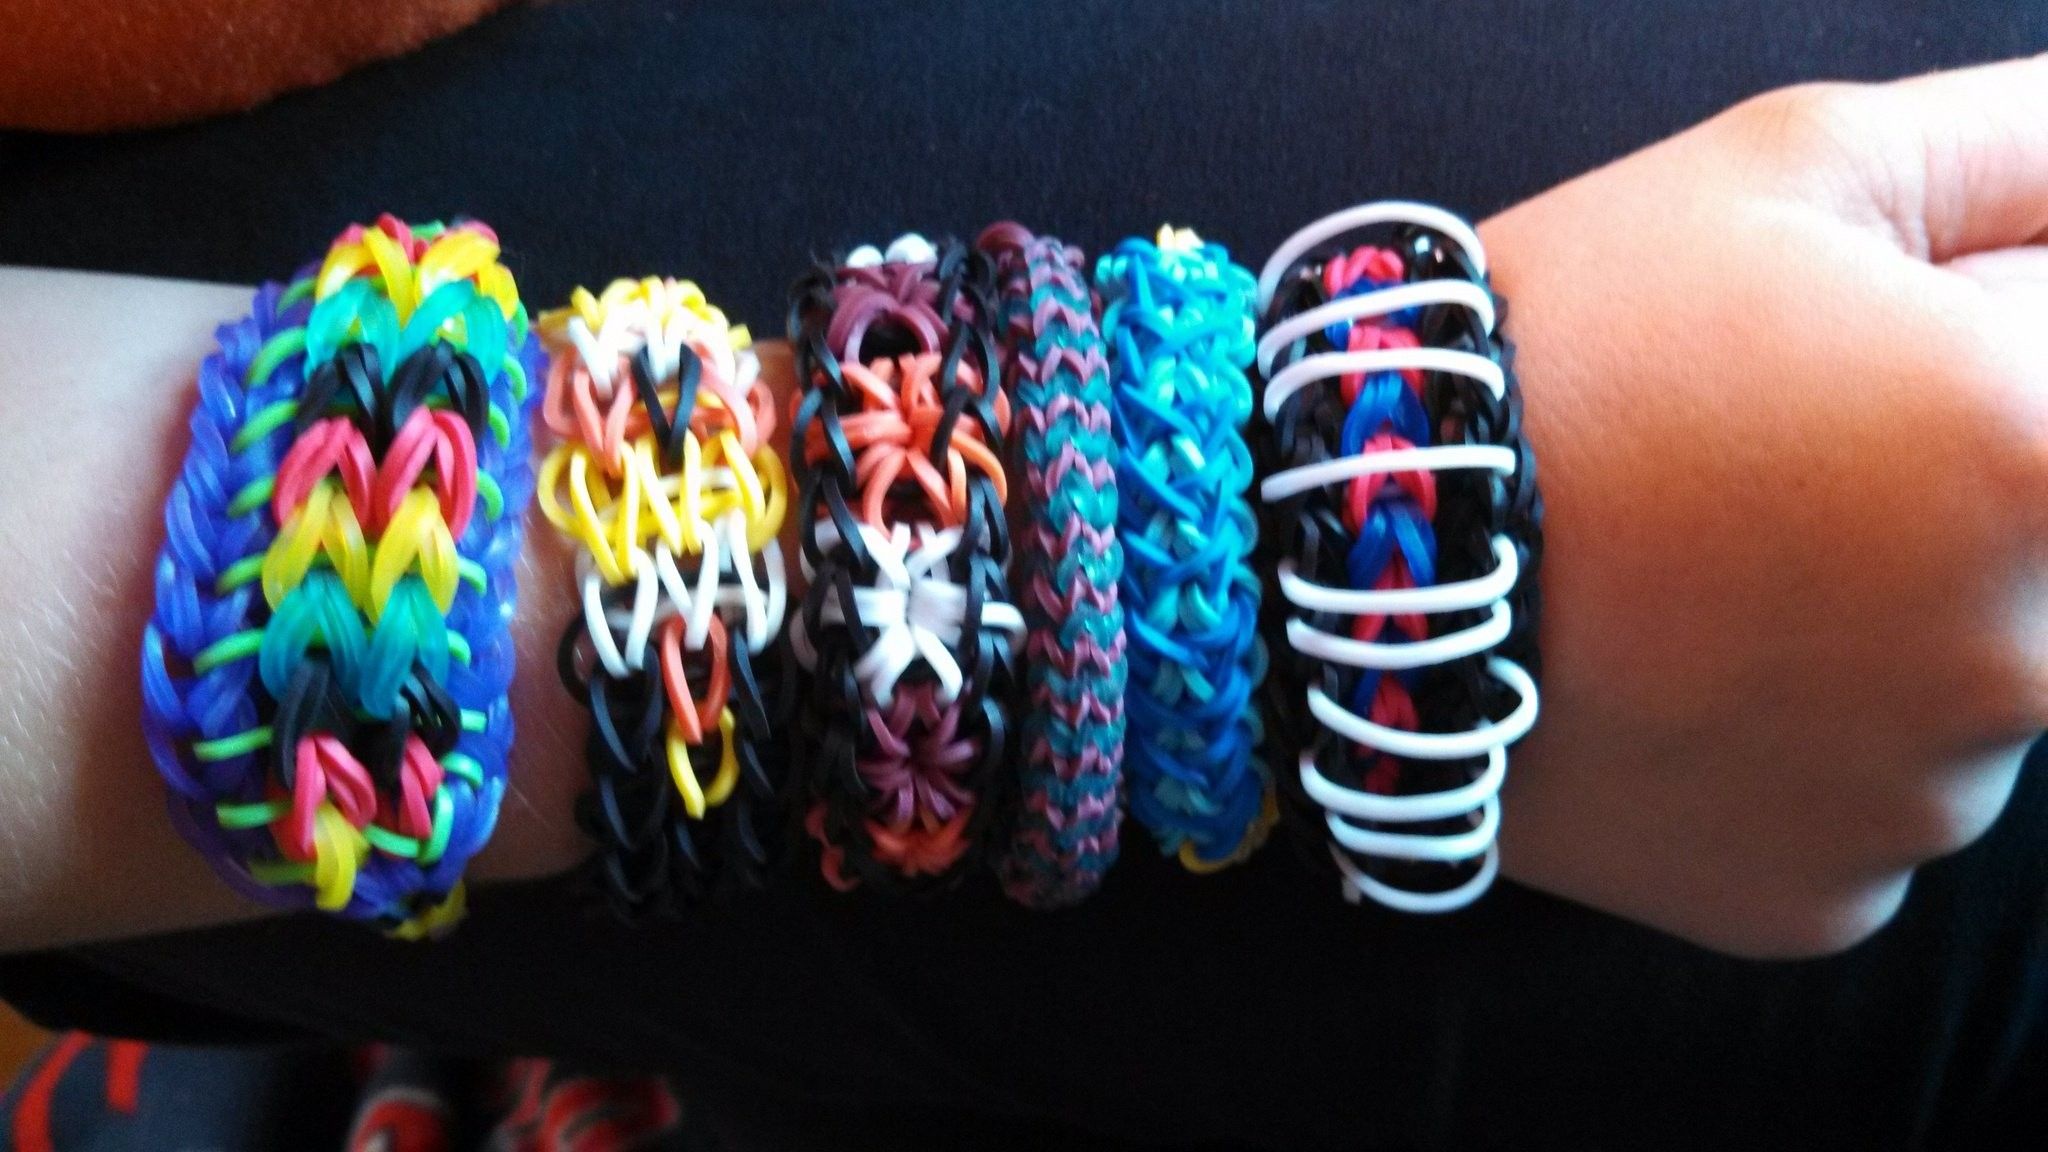 The Rainbow Loom bracelet trend is sweeping the nation